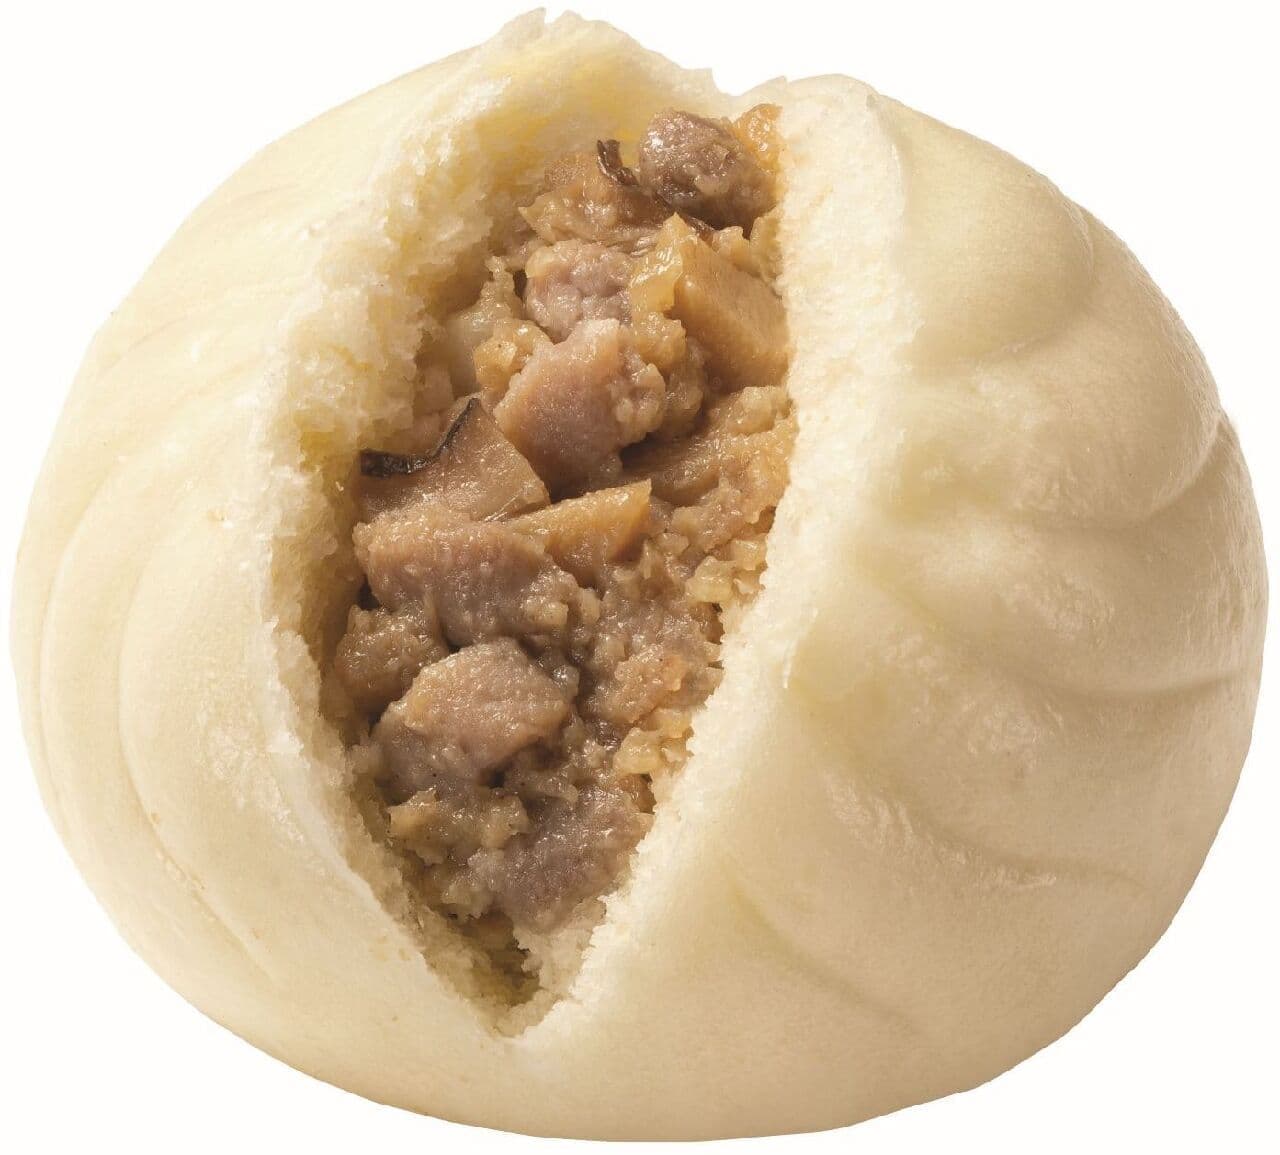 FamilyMart "Juicy steamed meat buns with chunky dough